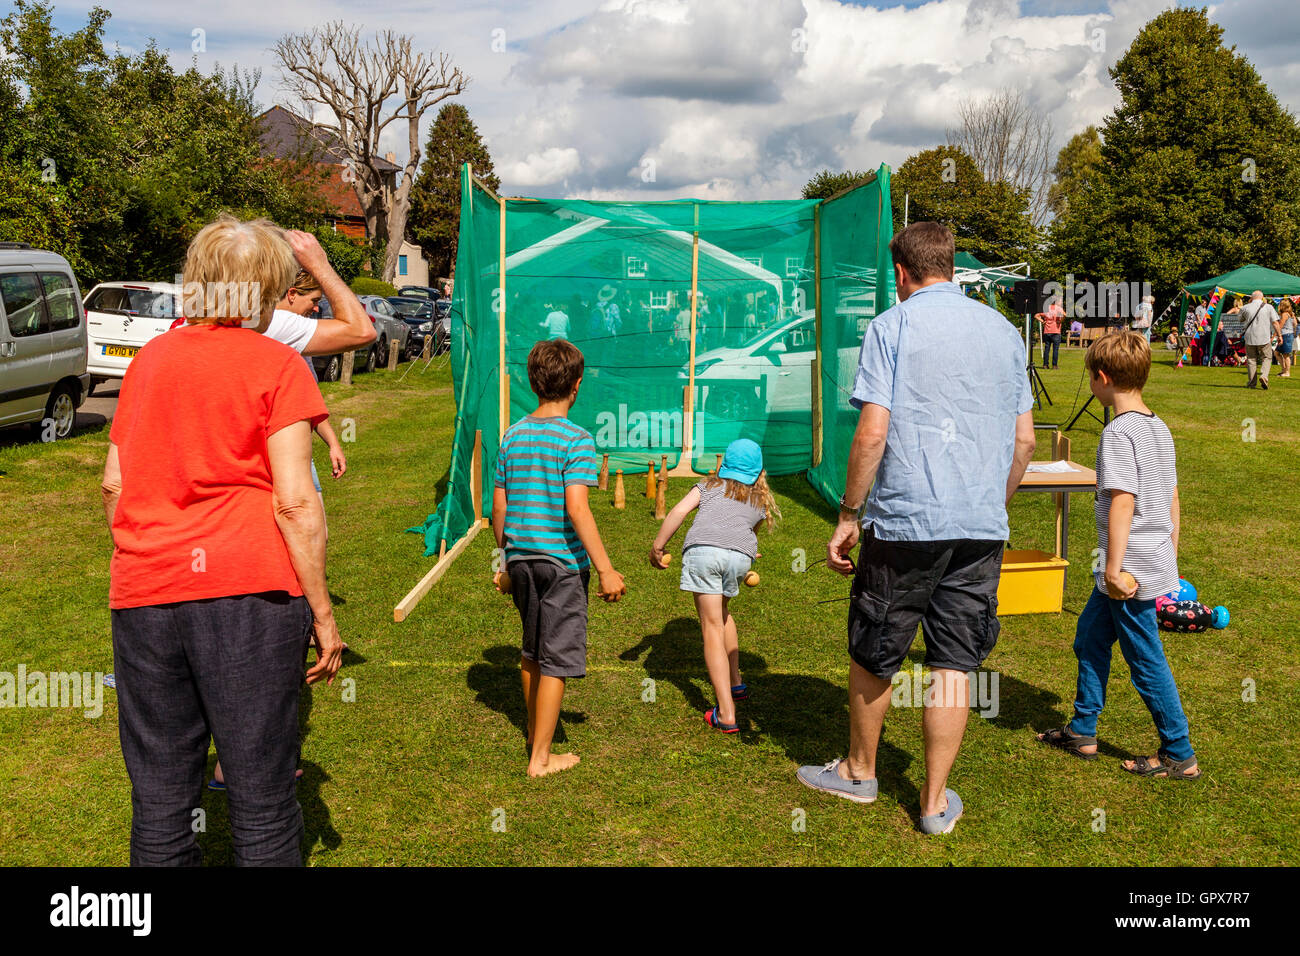 Families Playing Skittles At The Annual Alfriston Village Fete, Alfriston, East Sussex, UK Stock Photo